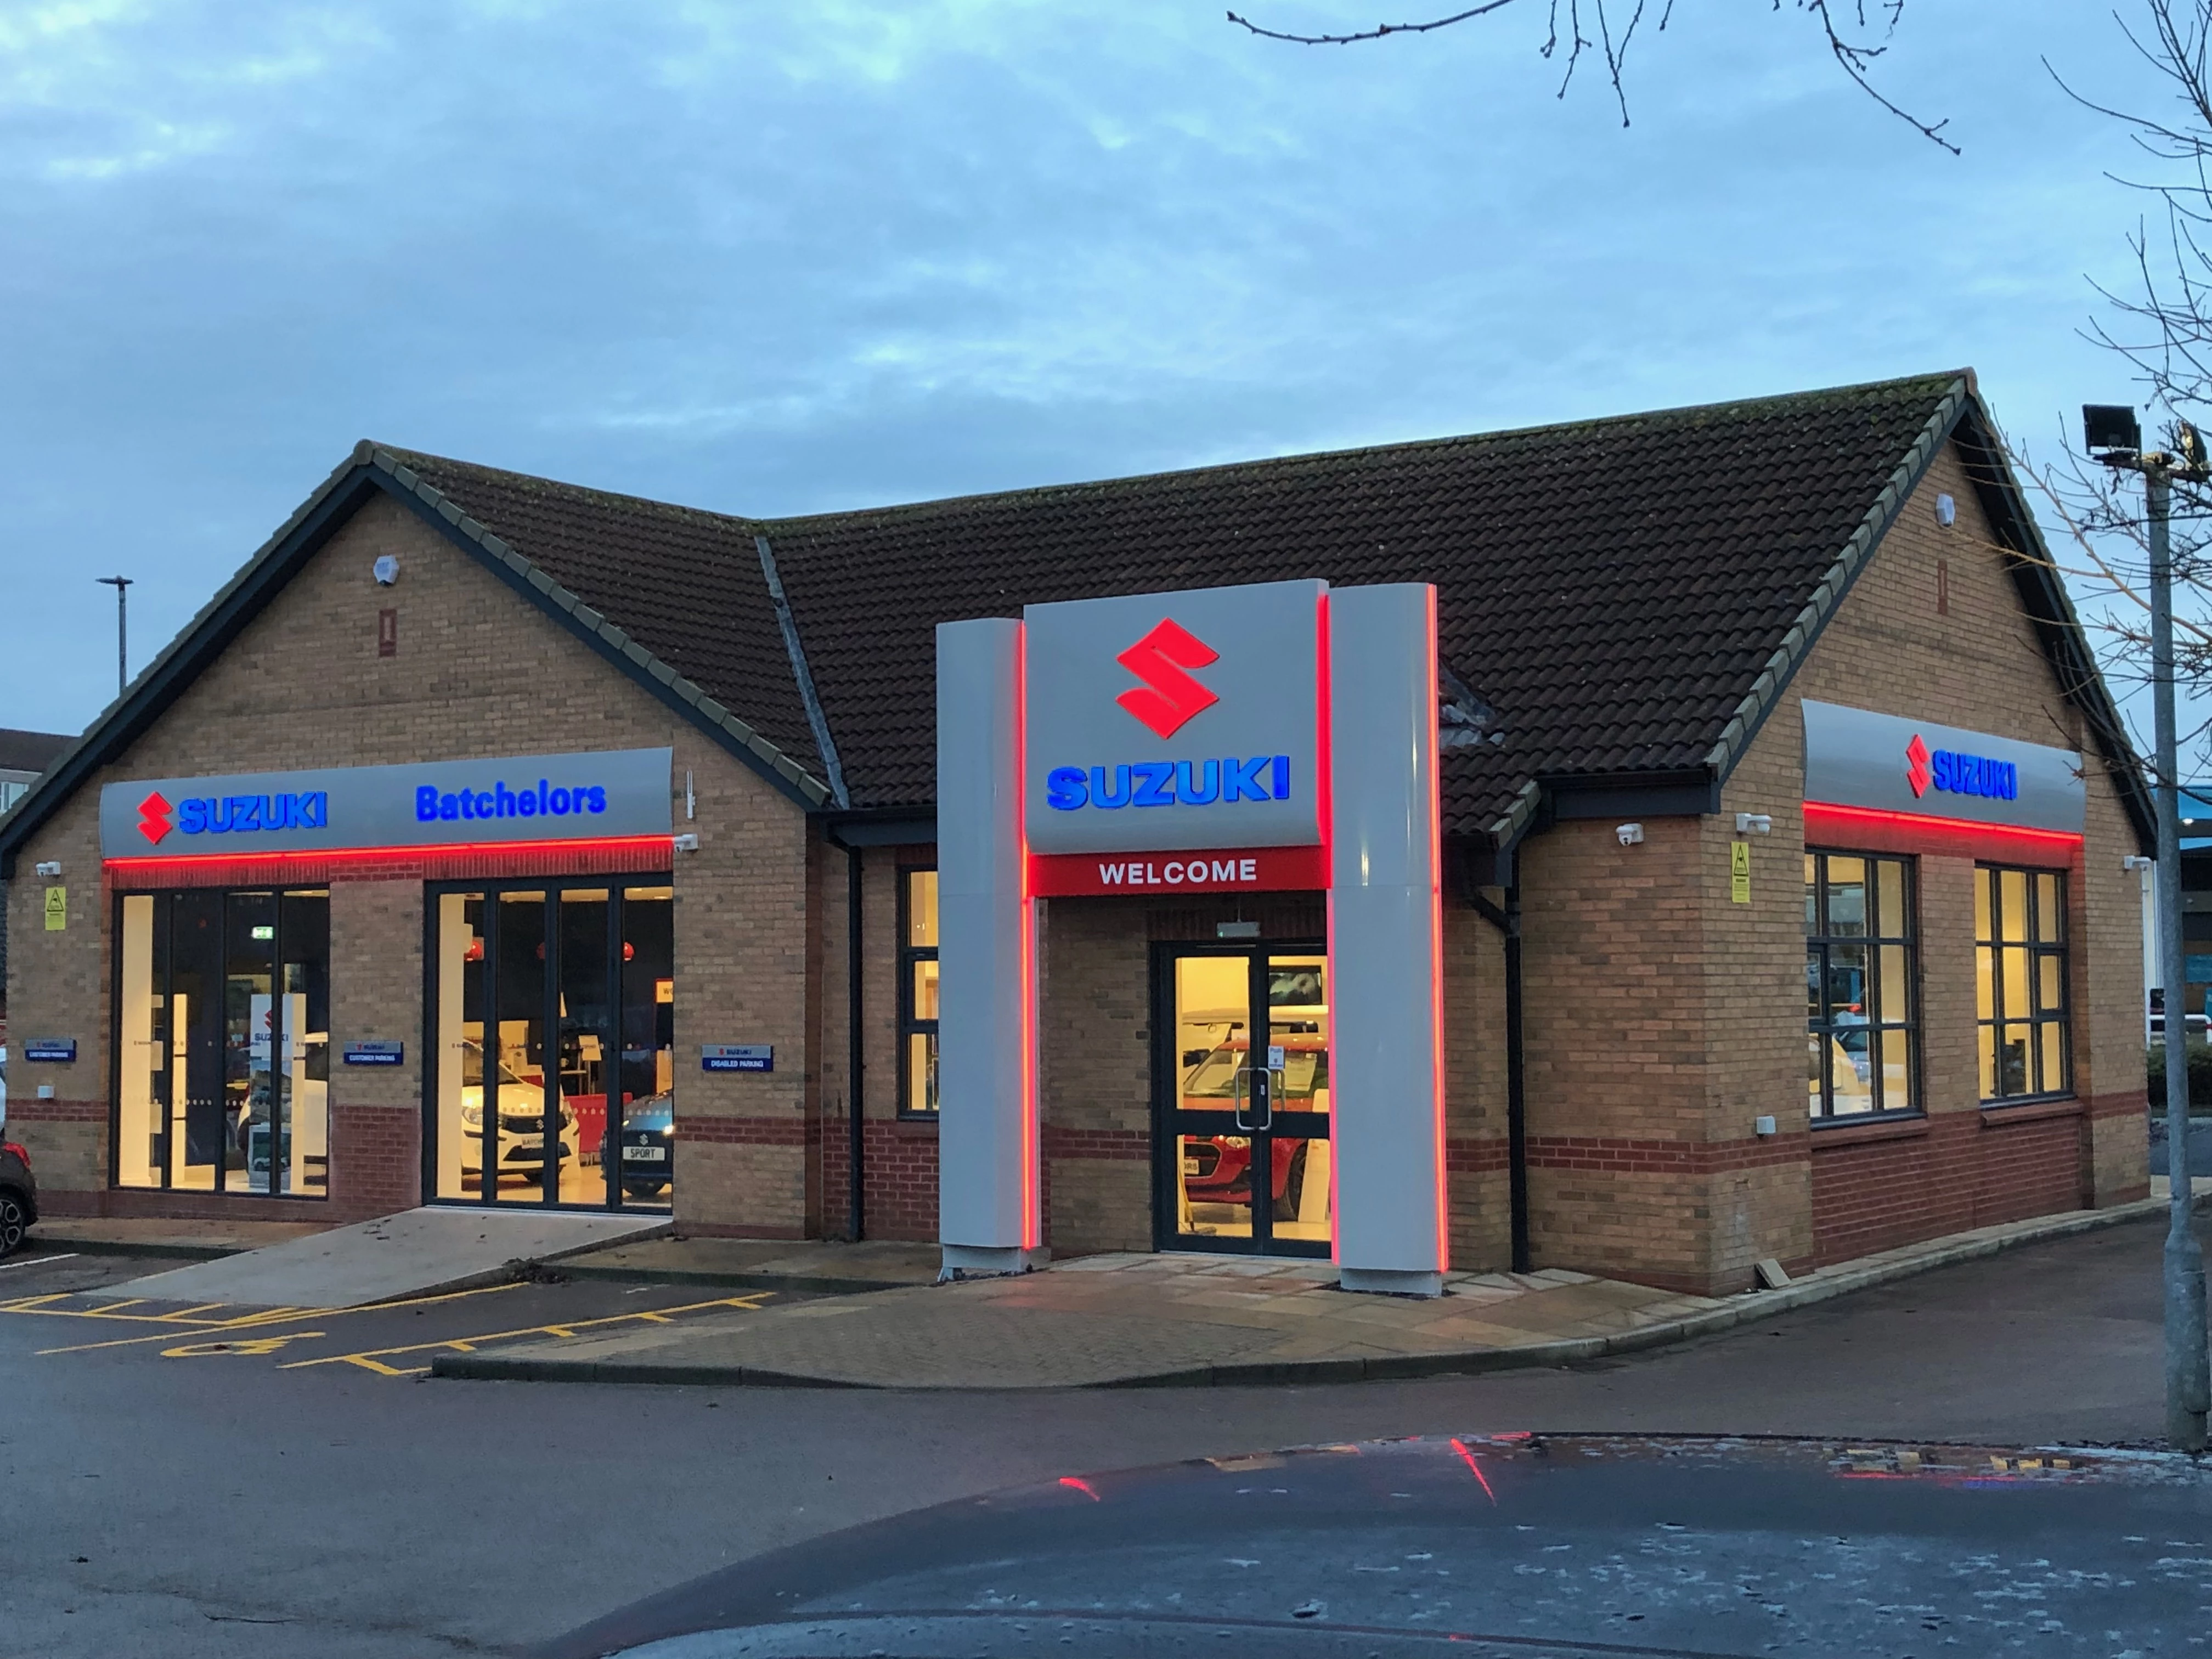 Batchelors opened its Suzuki showroom at the end of 2018